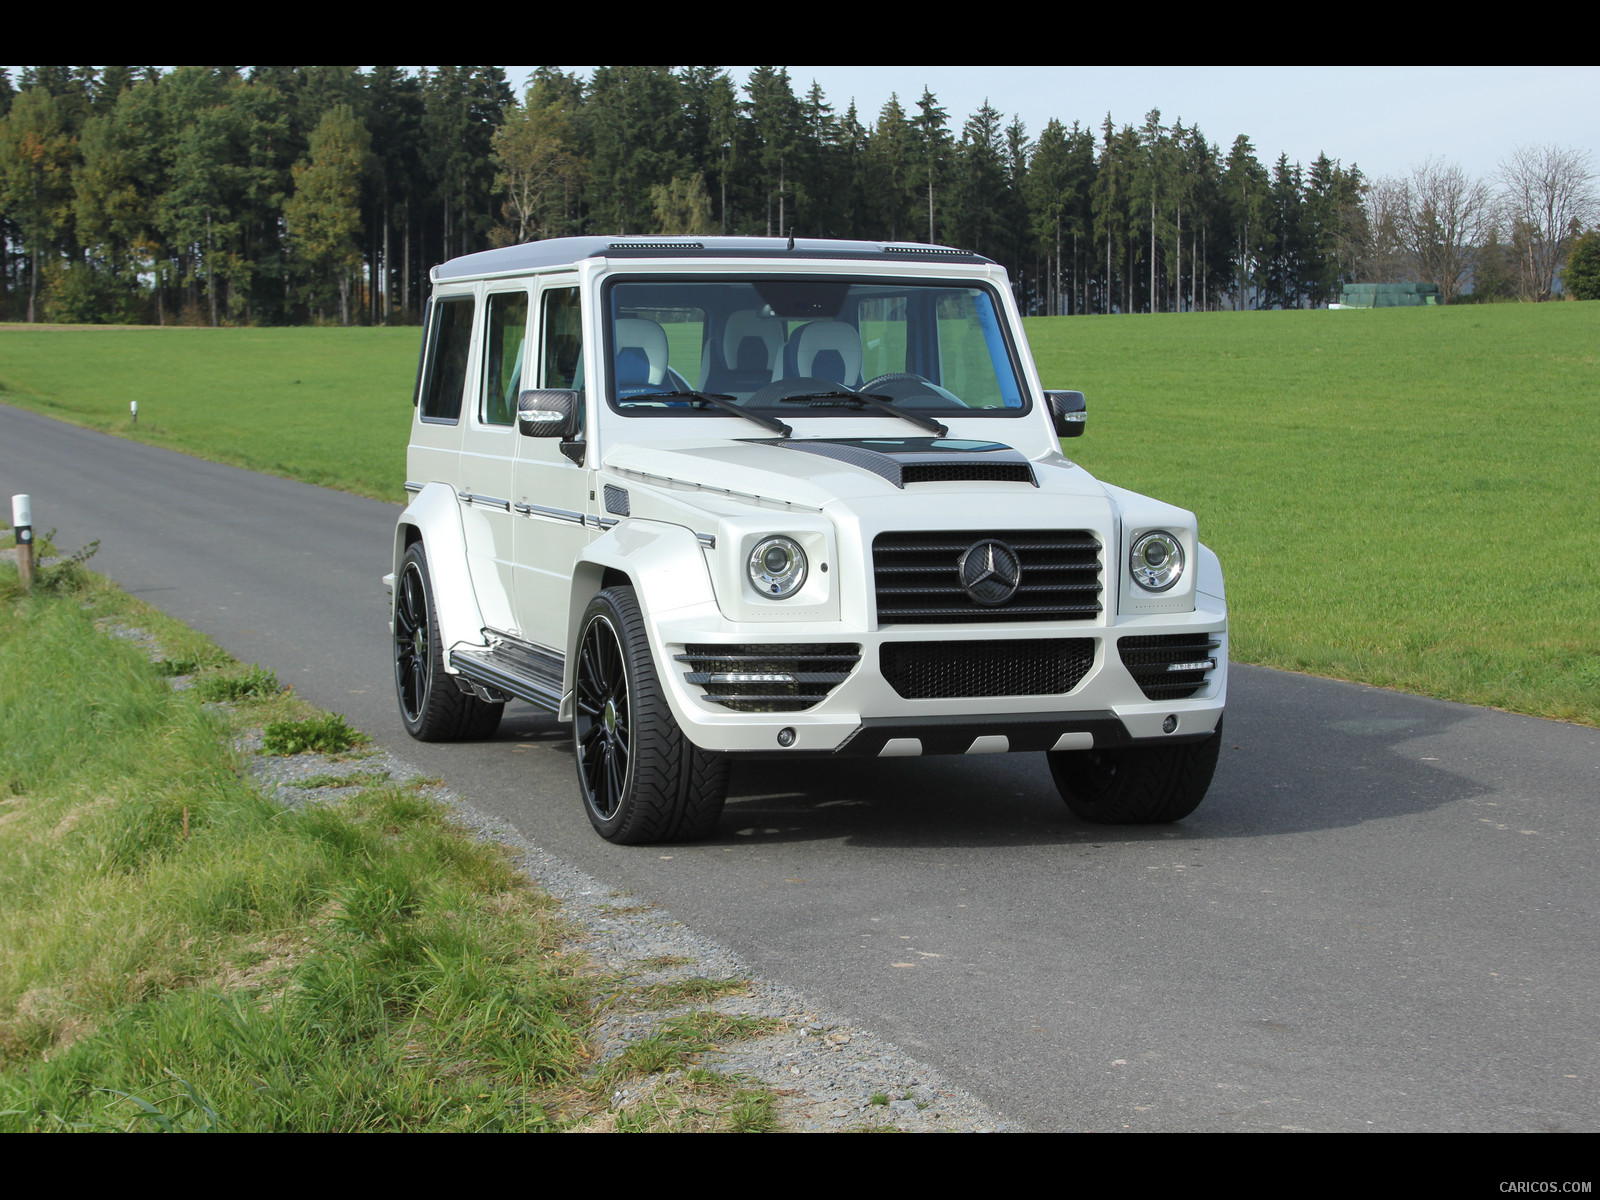 Mansory G-Couture based on Mercedes G-Class White - Front, #18 of 39